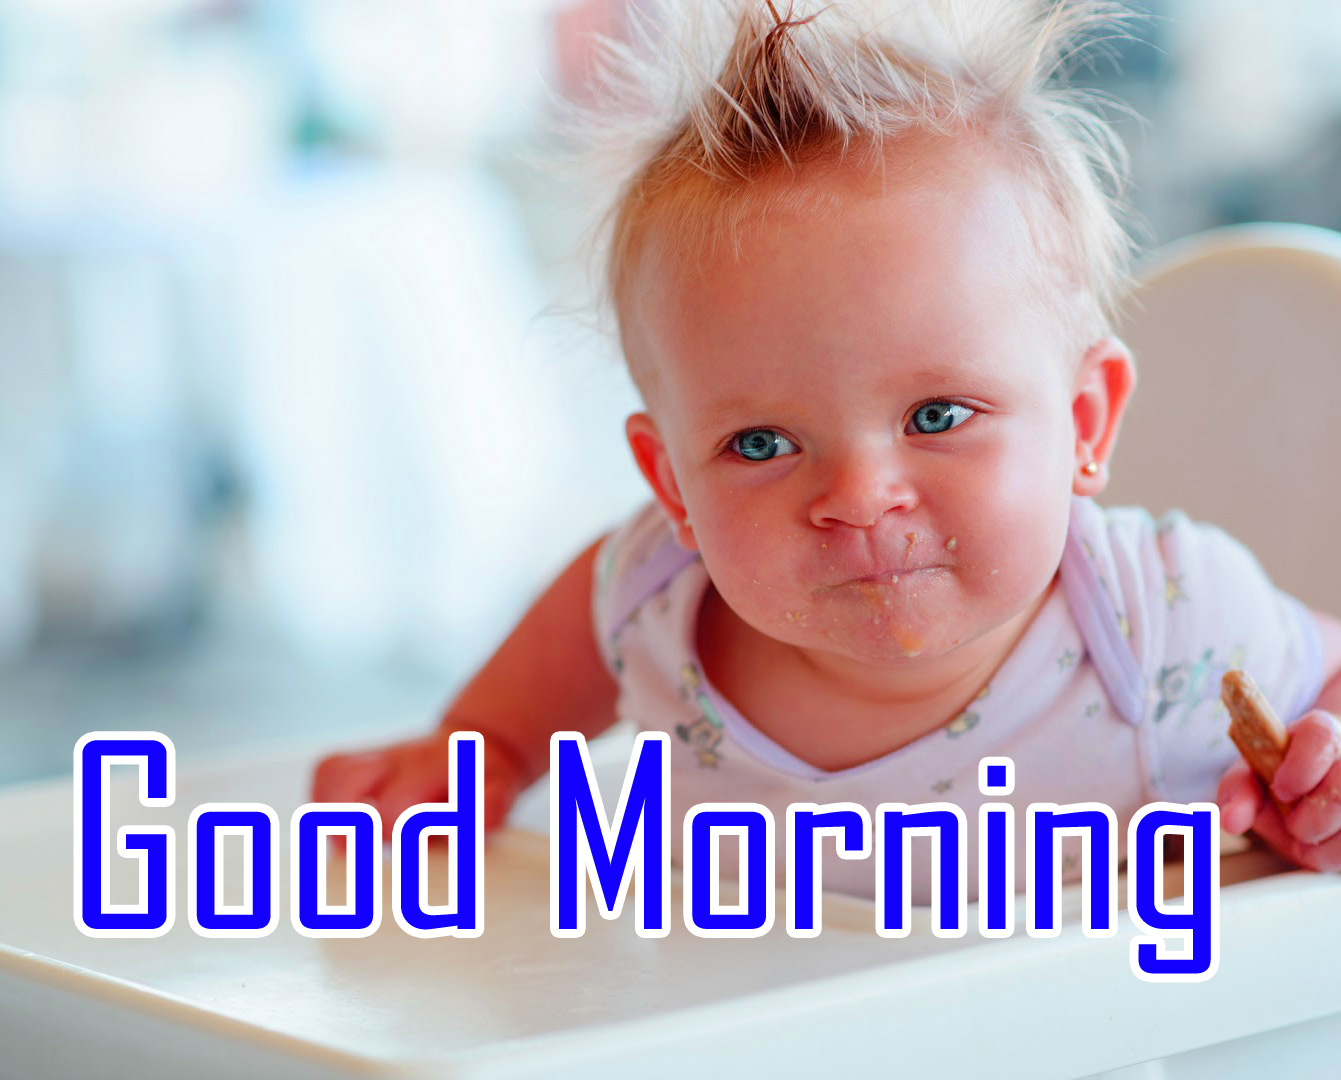 Funny Good Morning Wishes Photo for Facebook